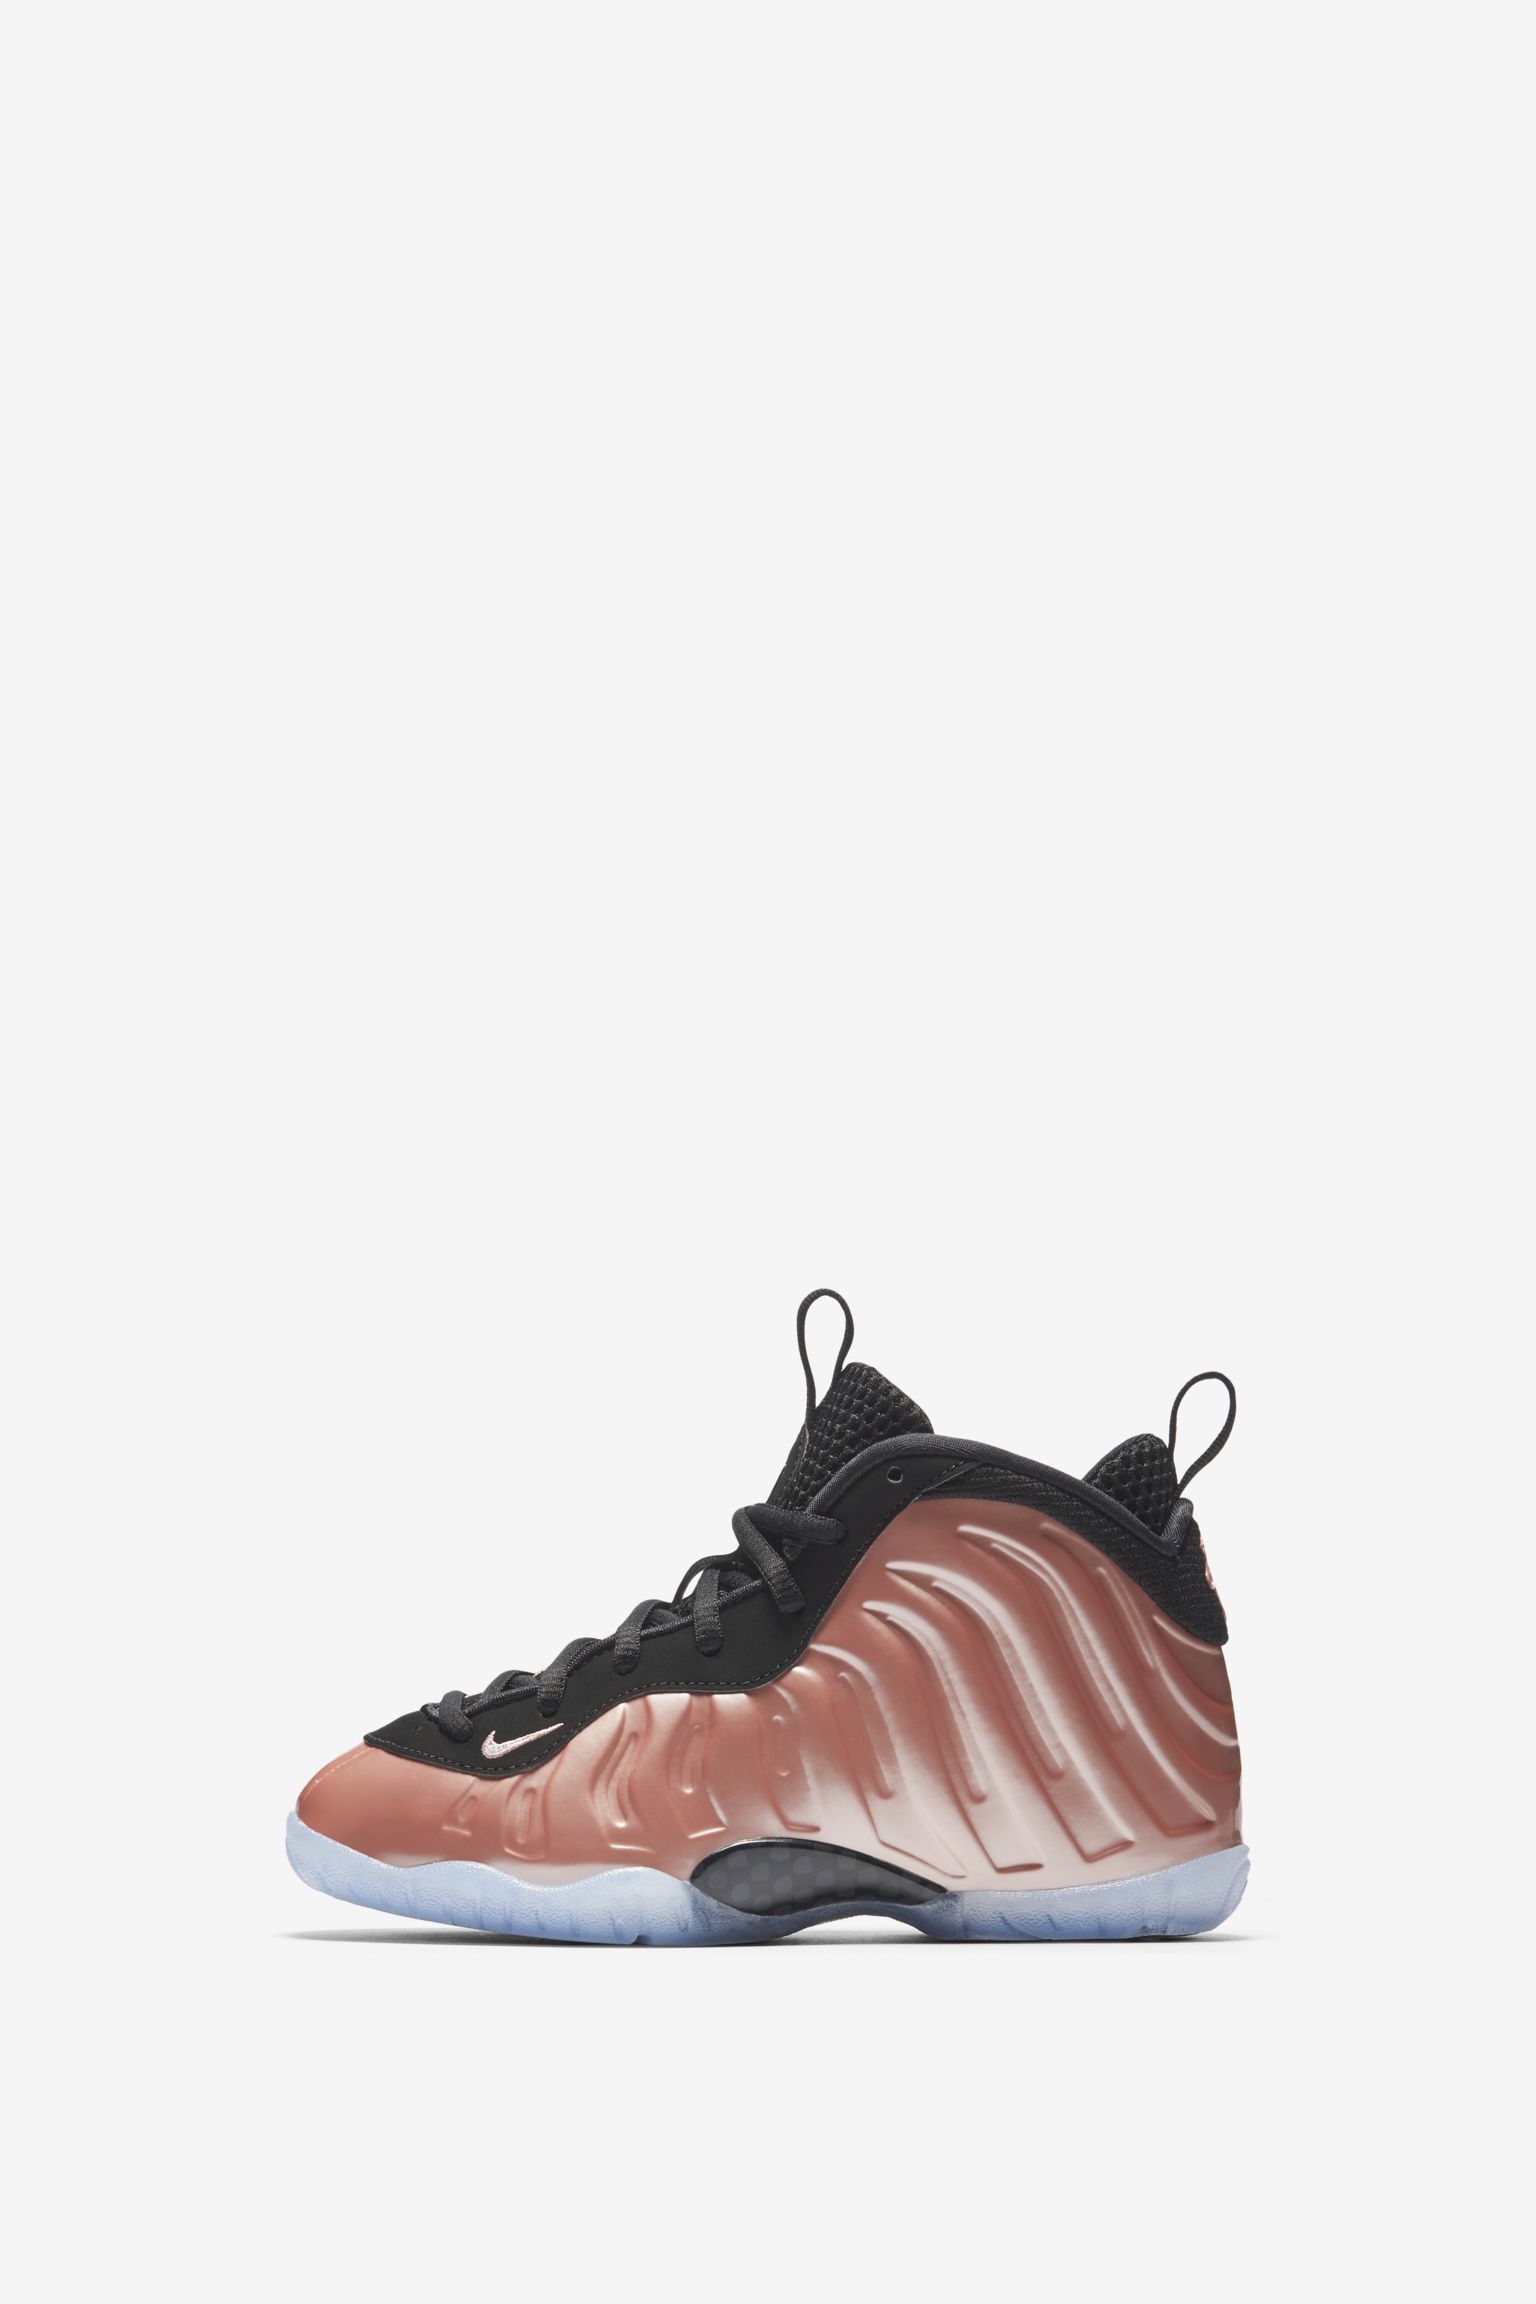 pink and grey foamposites